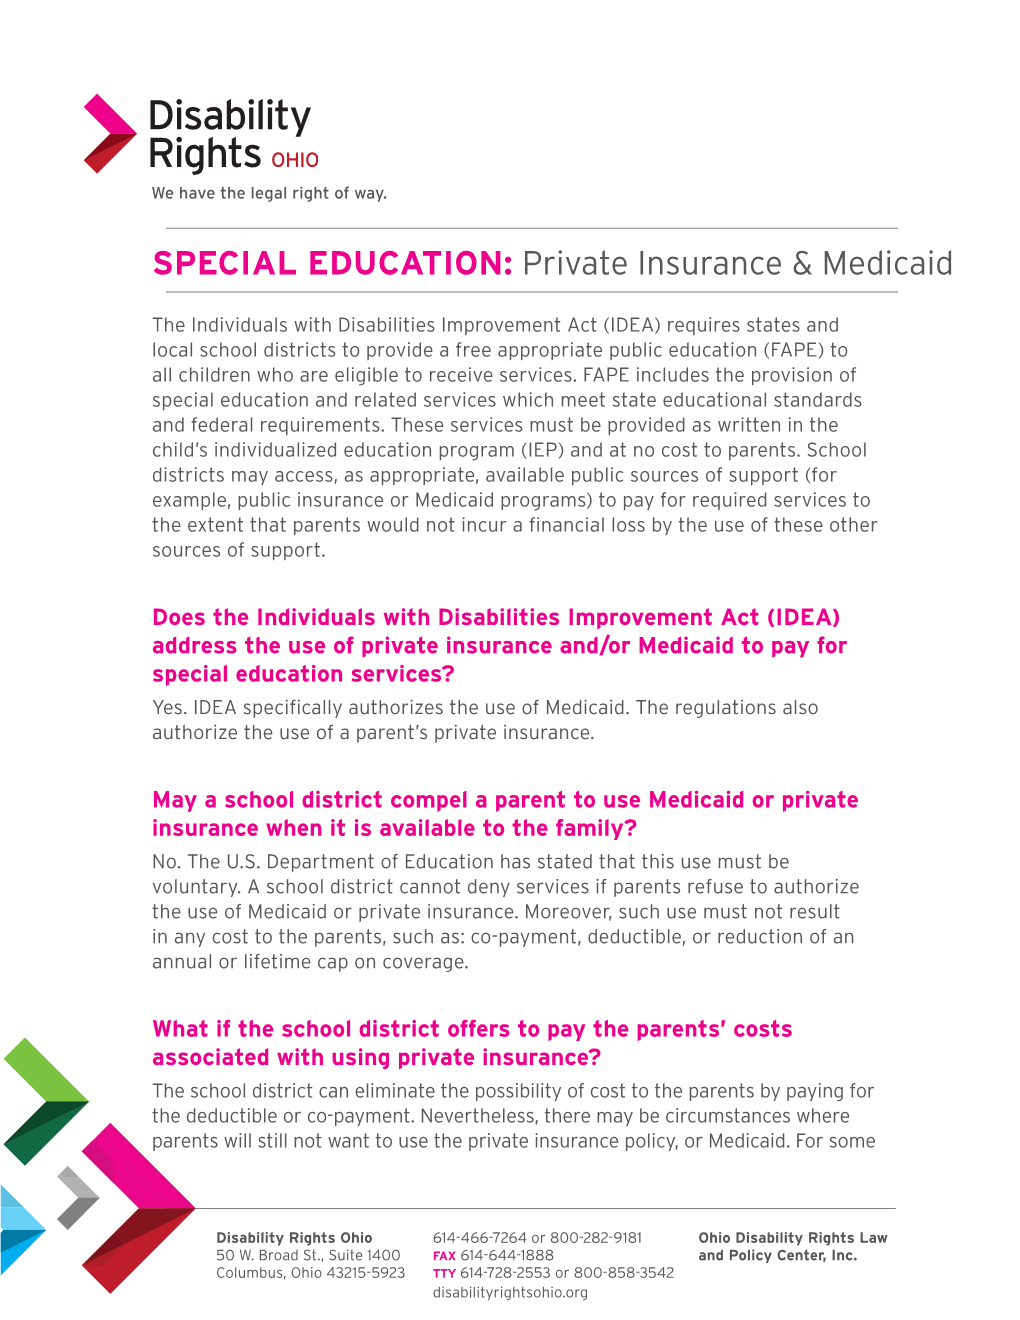 SPECIAL EDUCATION: Private Insurance & Medicaid